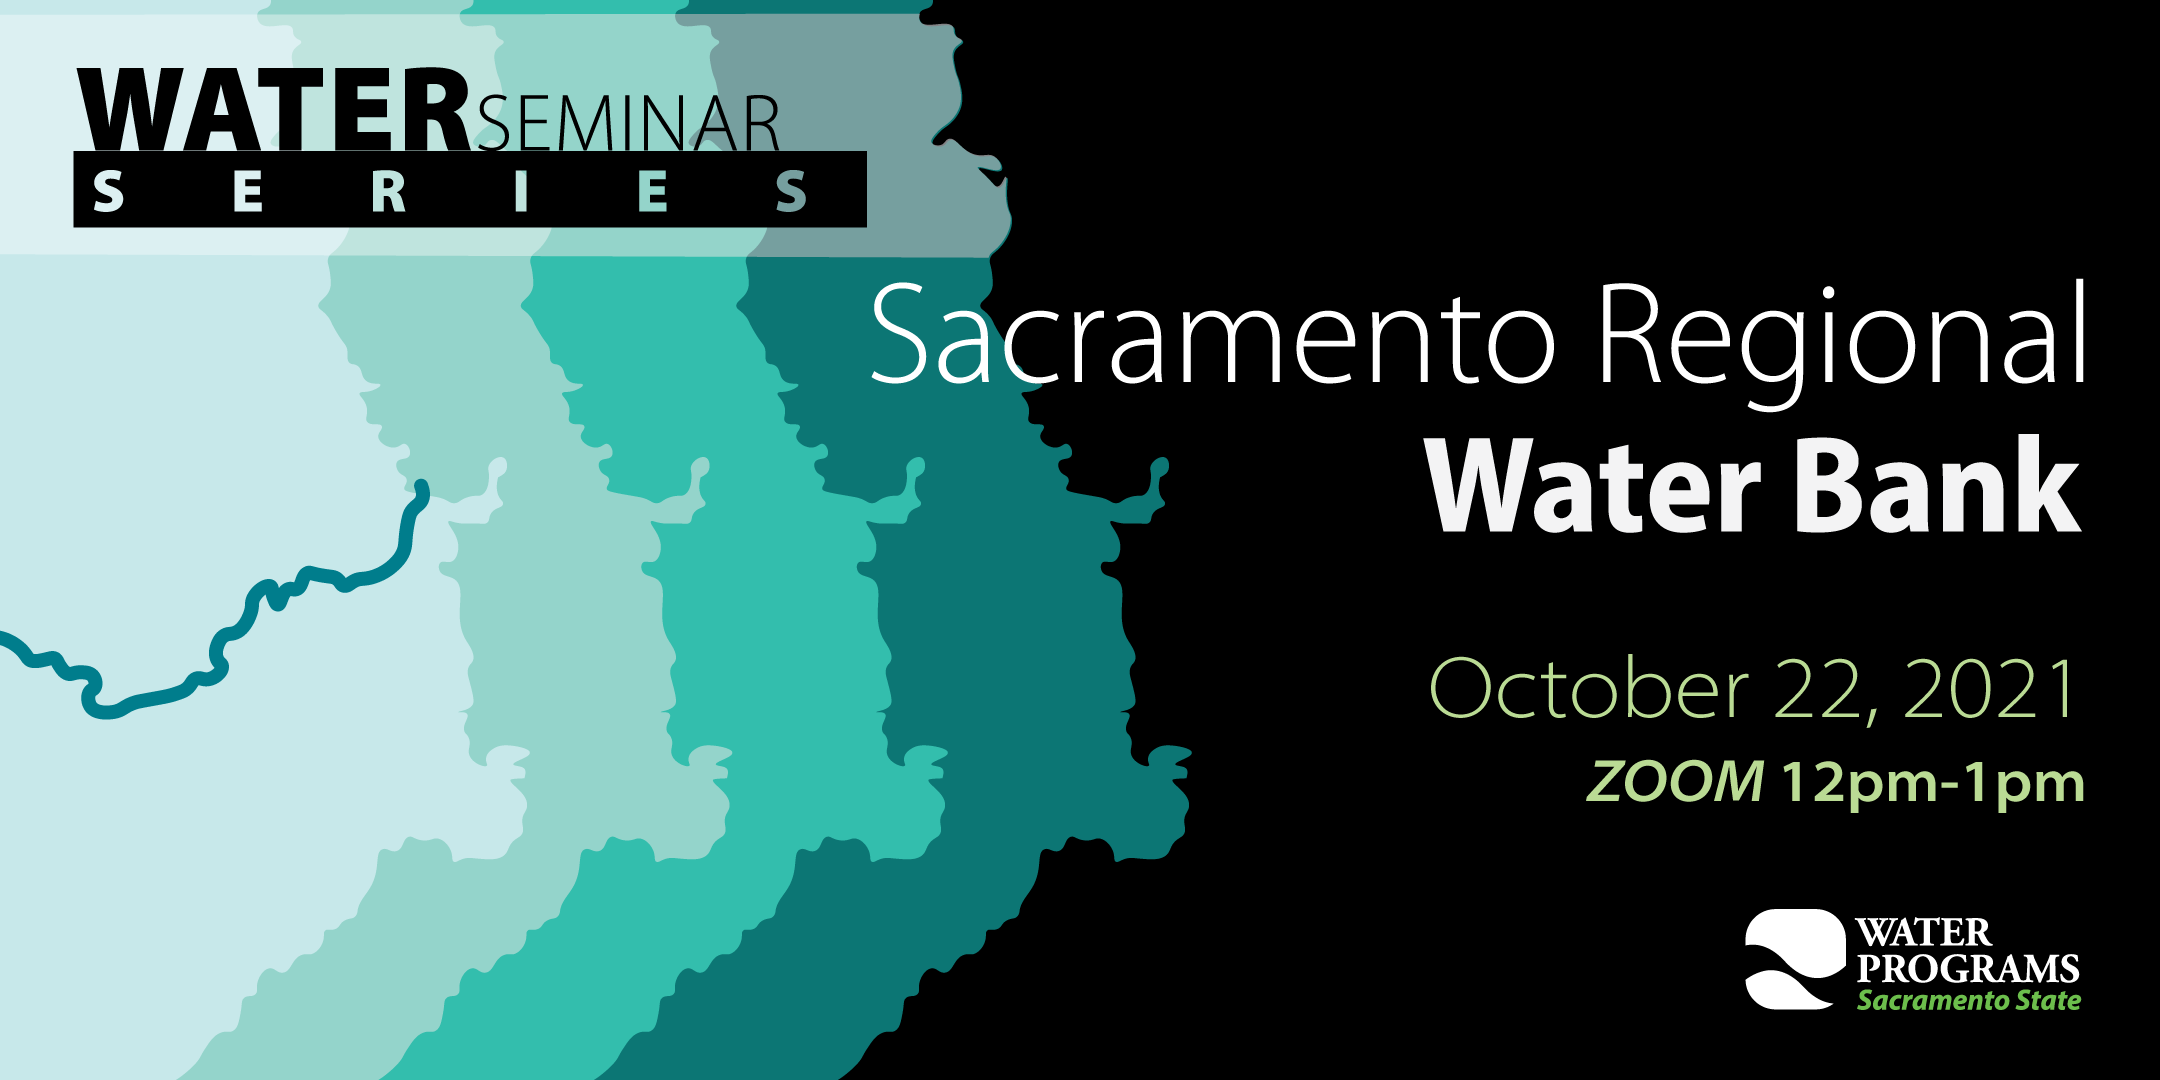 Water Seminar March 12, 2021, Sites Reservoir Project